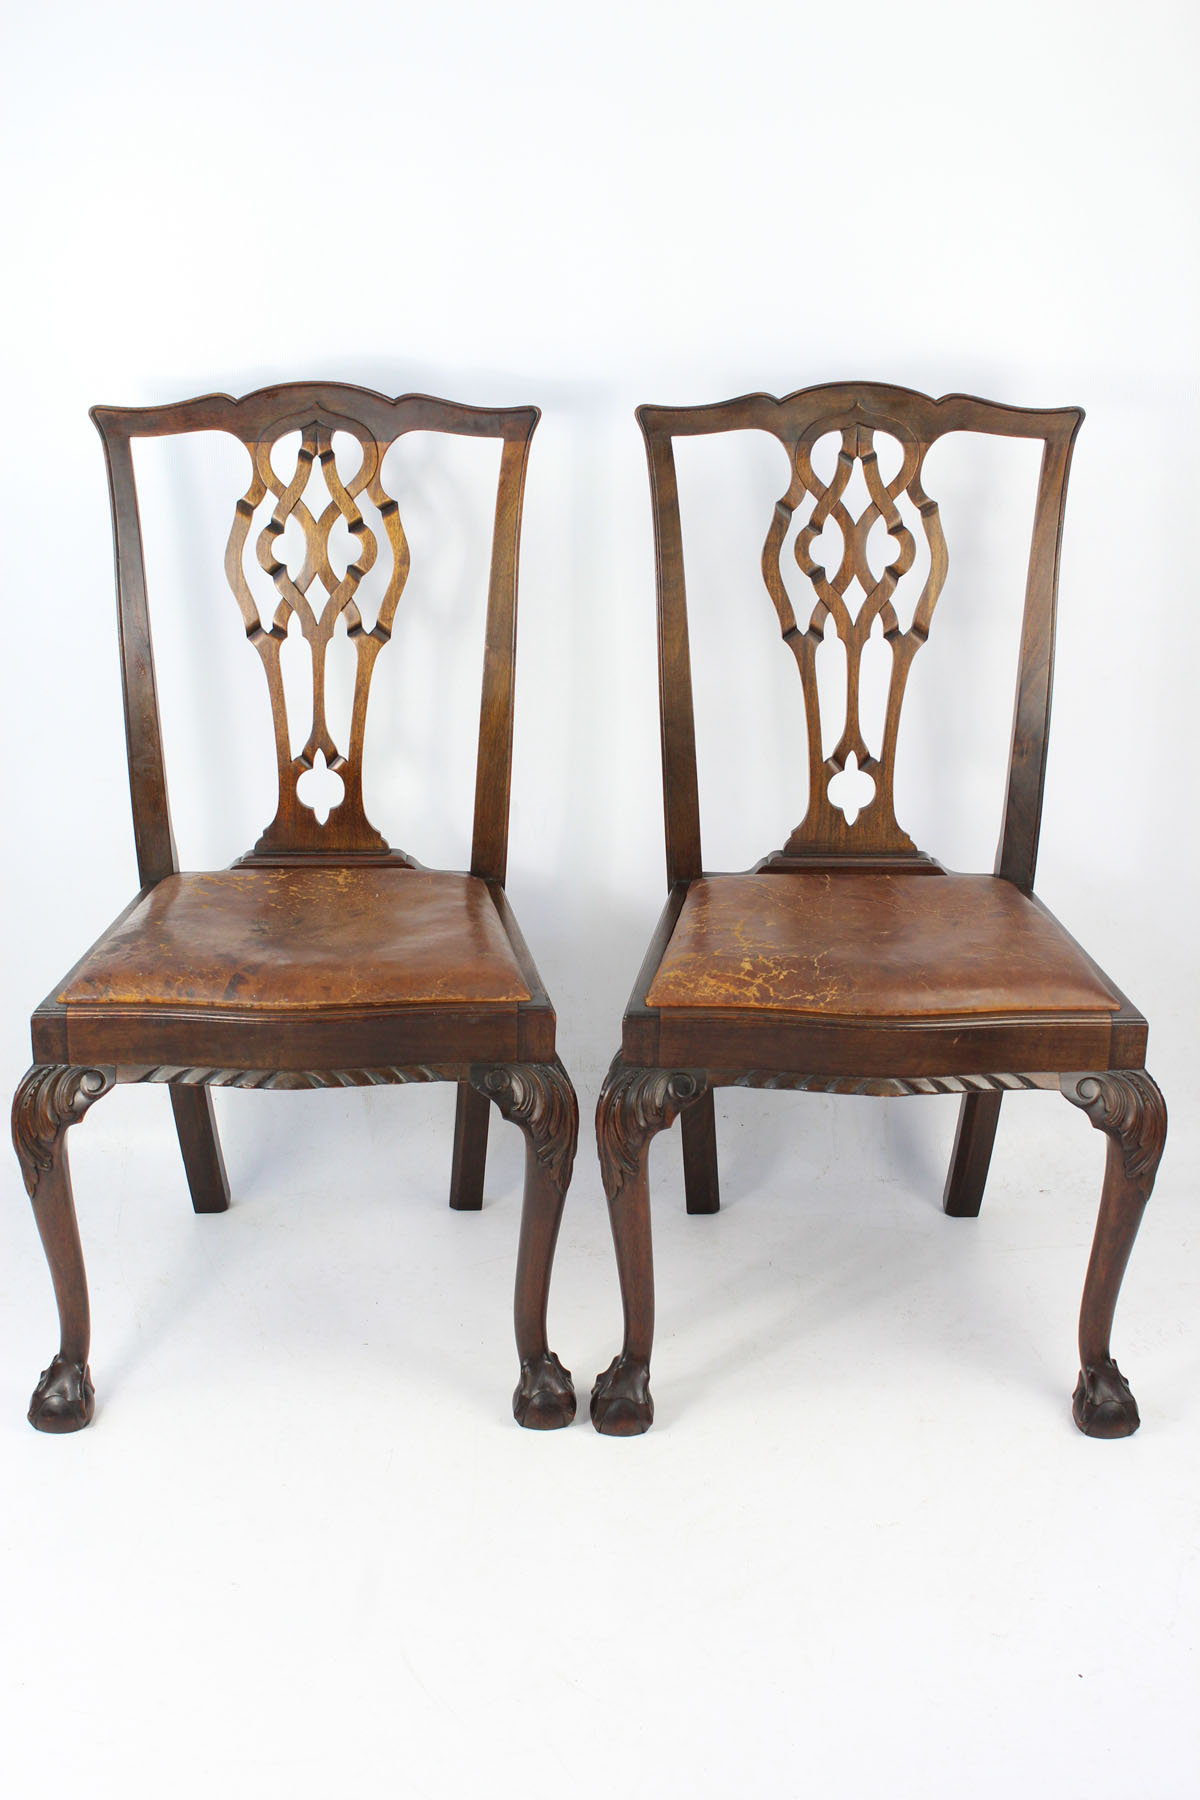 Set 4 Mahogany Chippendale Dining Chairs Circa 1920s
